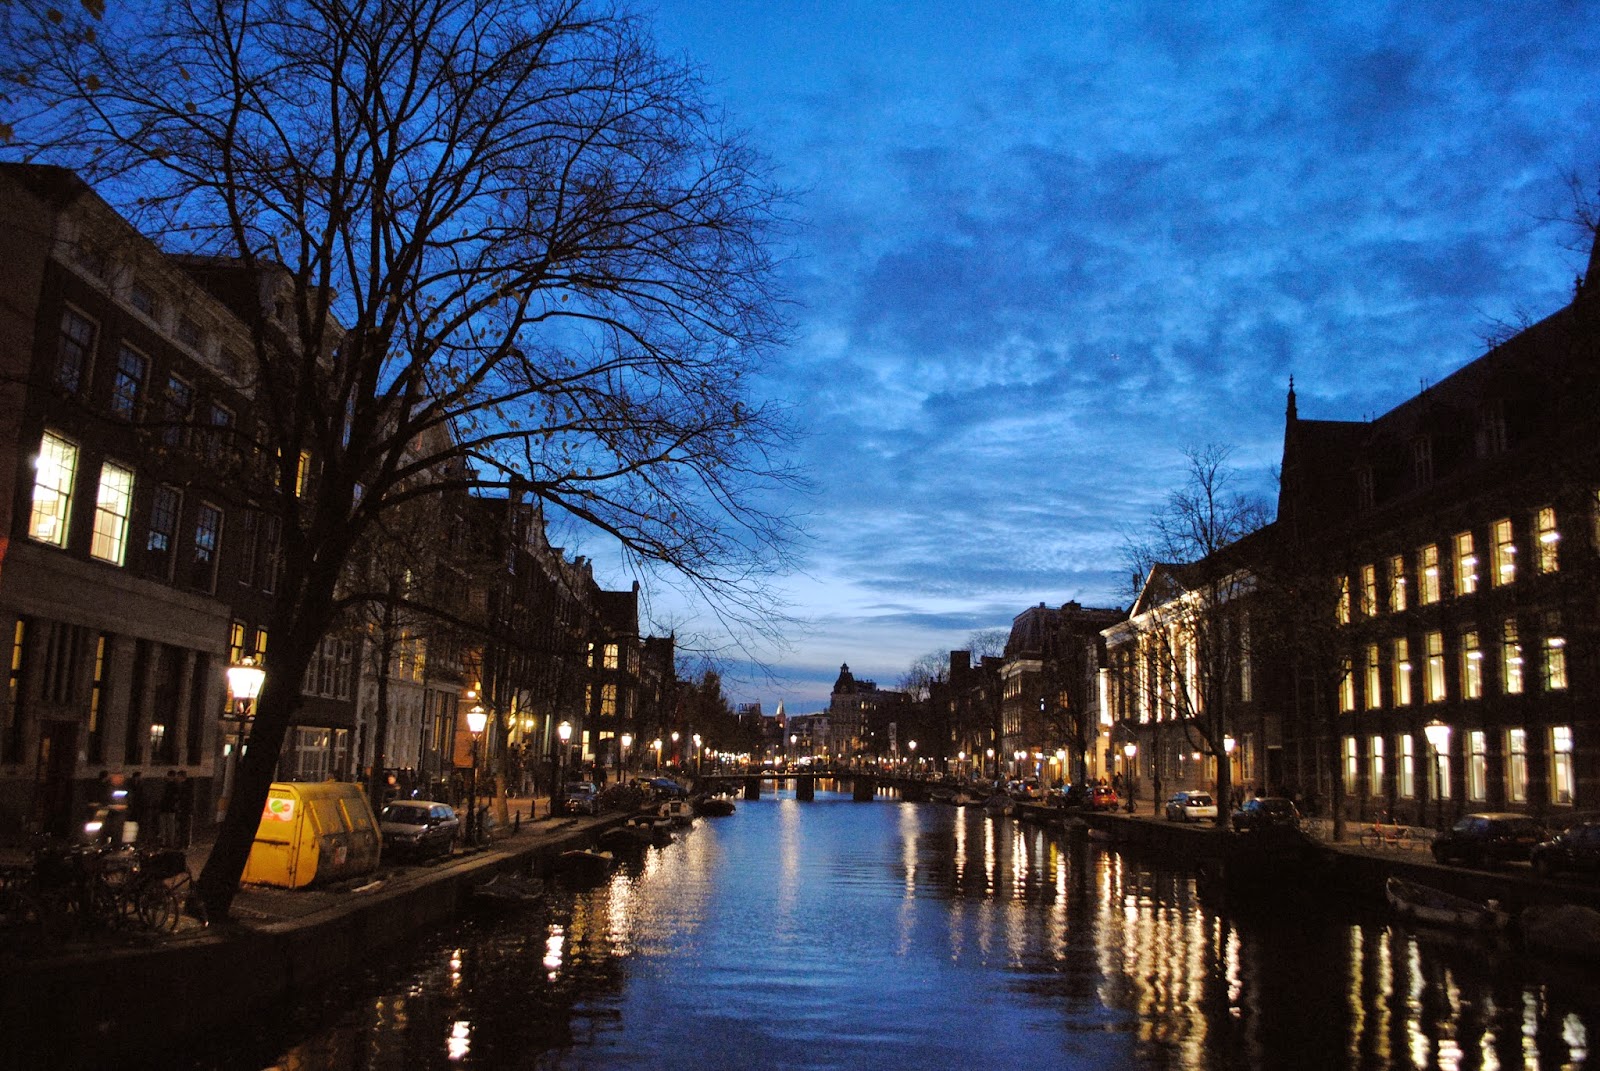 A beautiful view of an Amsterdam canal at night.